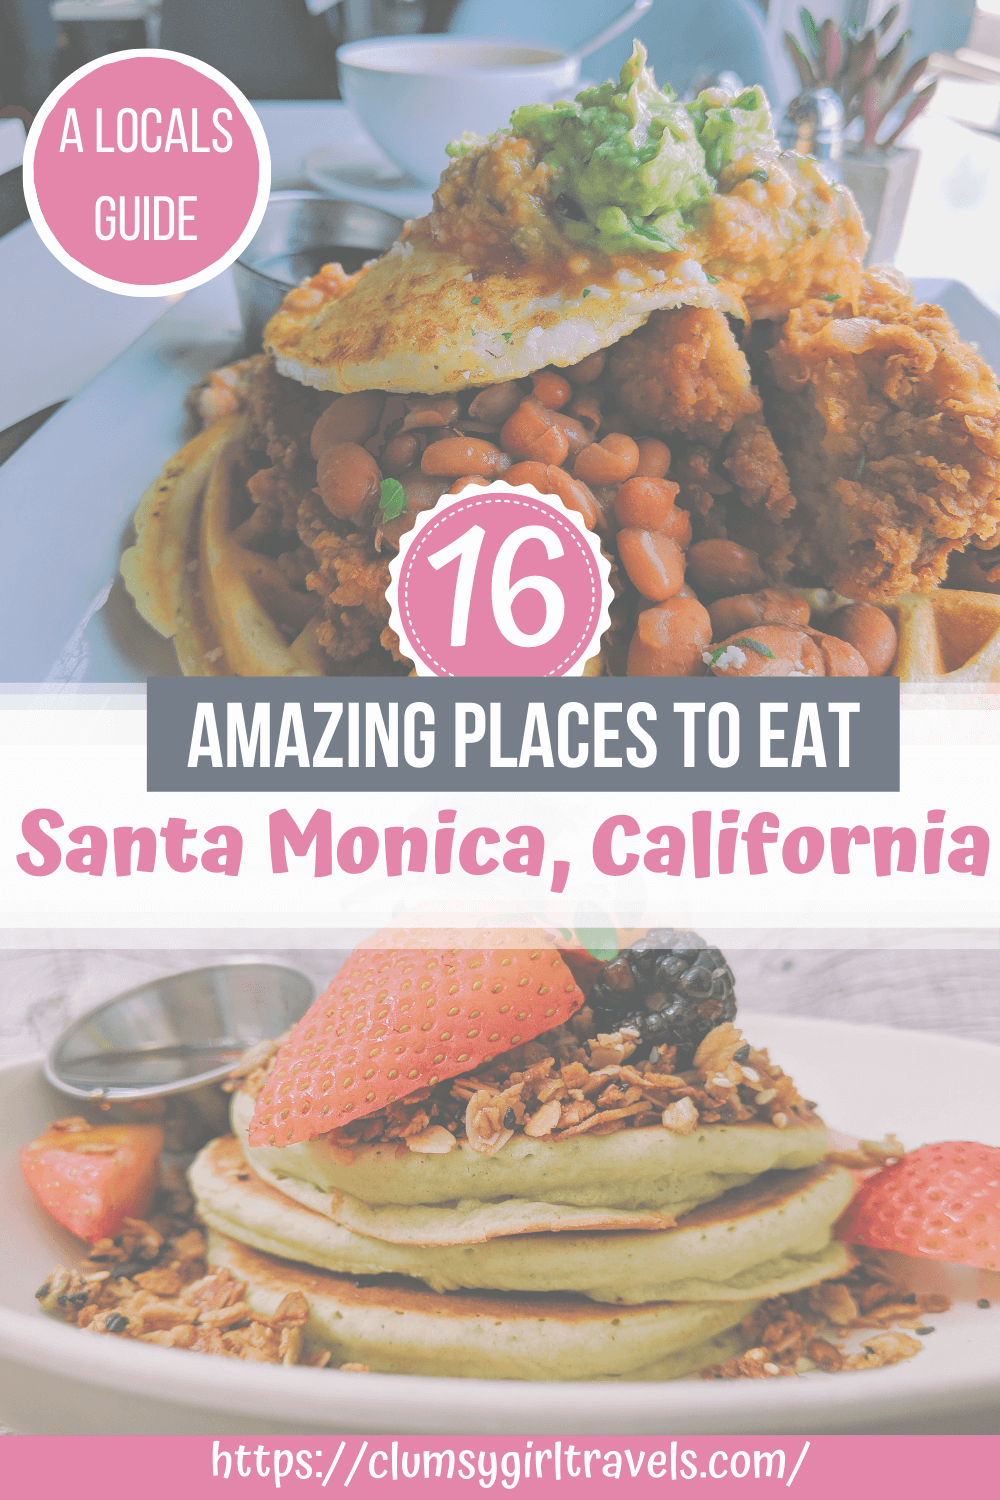 If you are wondering where to eat in Santa Monica, this is the guide for you. Santa Monica has tons of amazing restaurants just waiting to be discovered. #santamonicatravel #losangelestravel #californiatravel